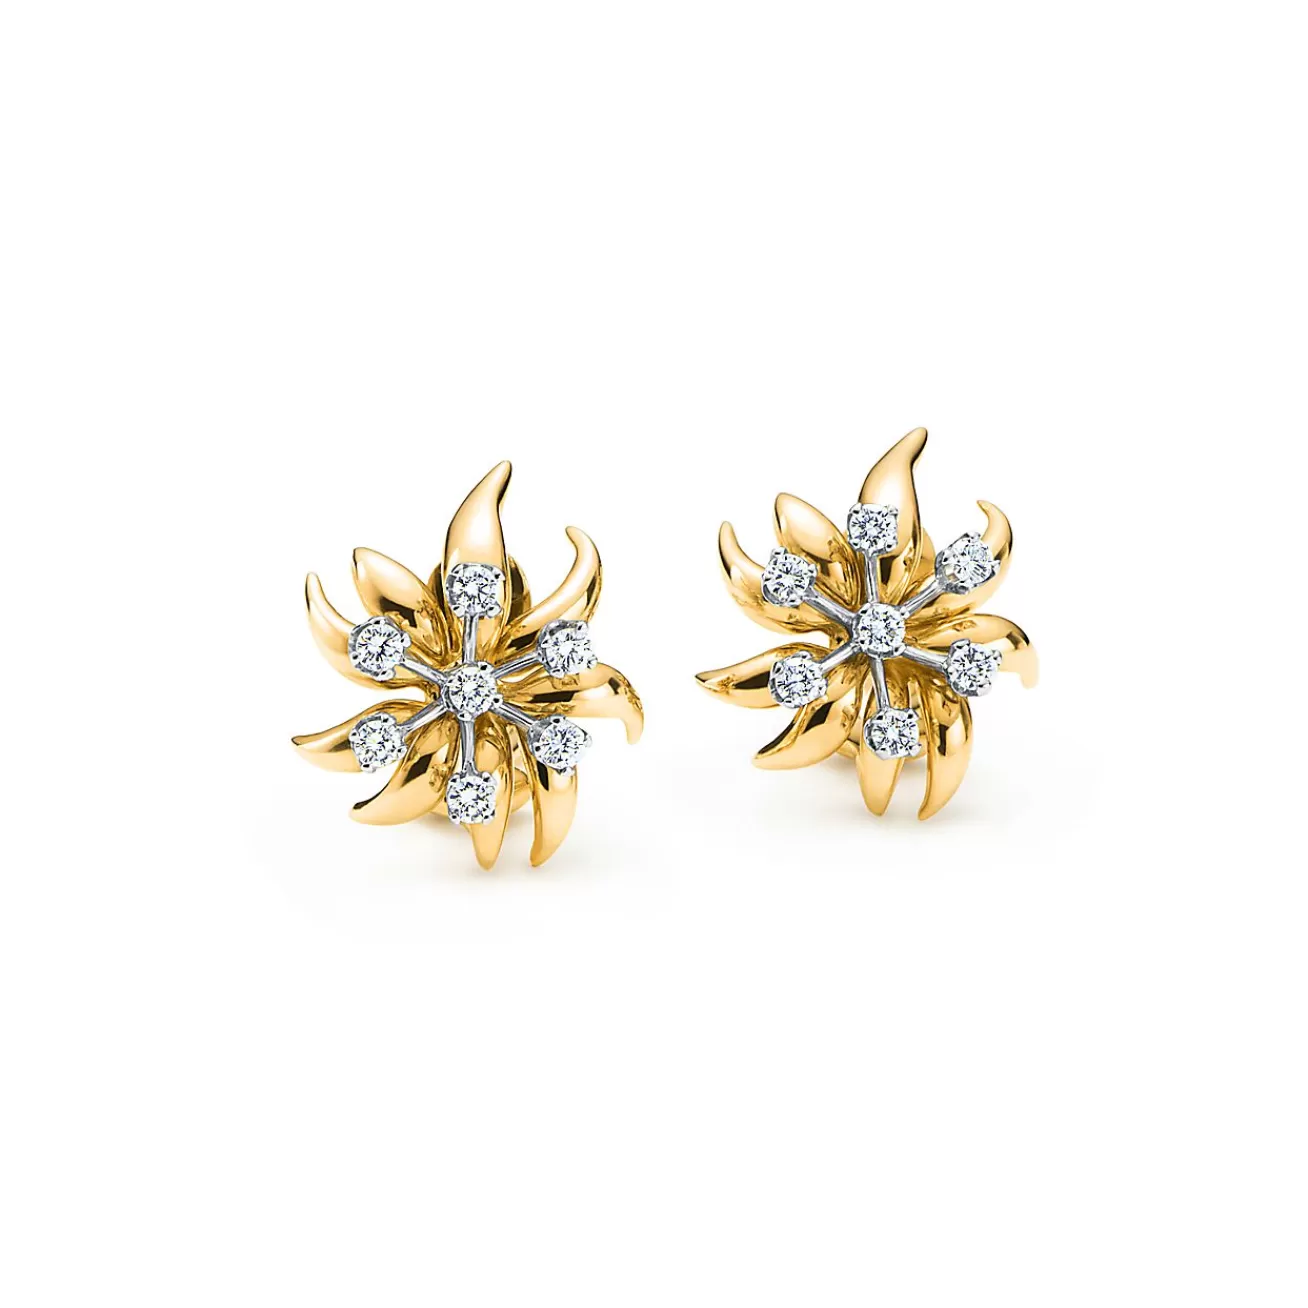 Tiffany & Co. Schlumberger® Flame ear clips in 18k gold with diamonds. | ^ Earrings | Gold Jewelry